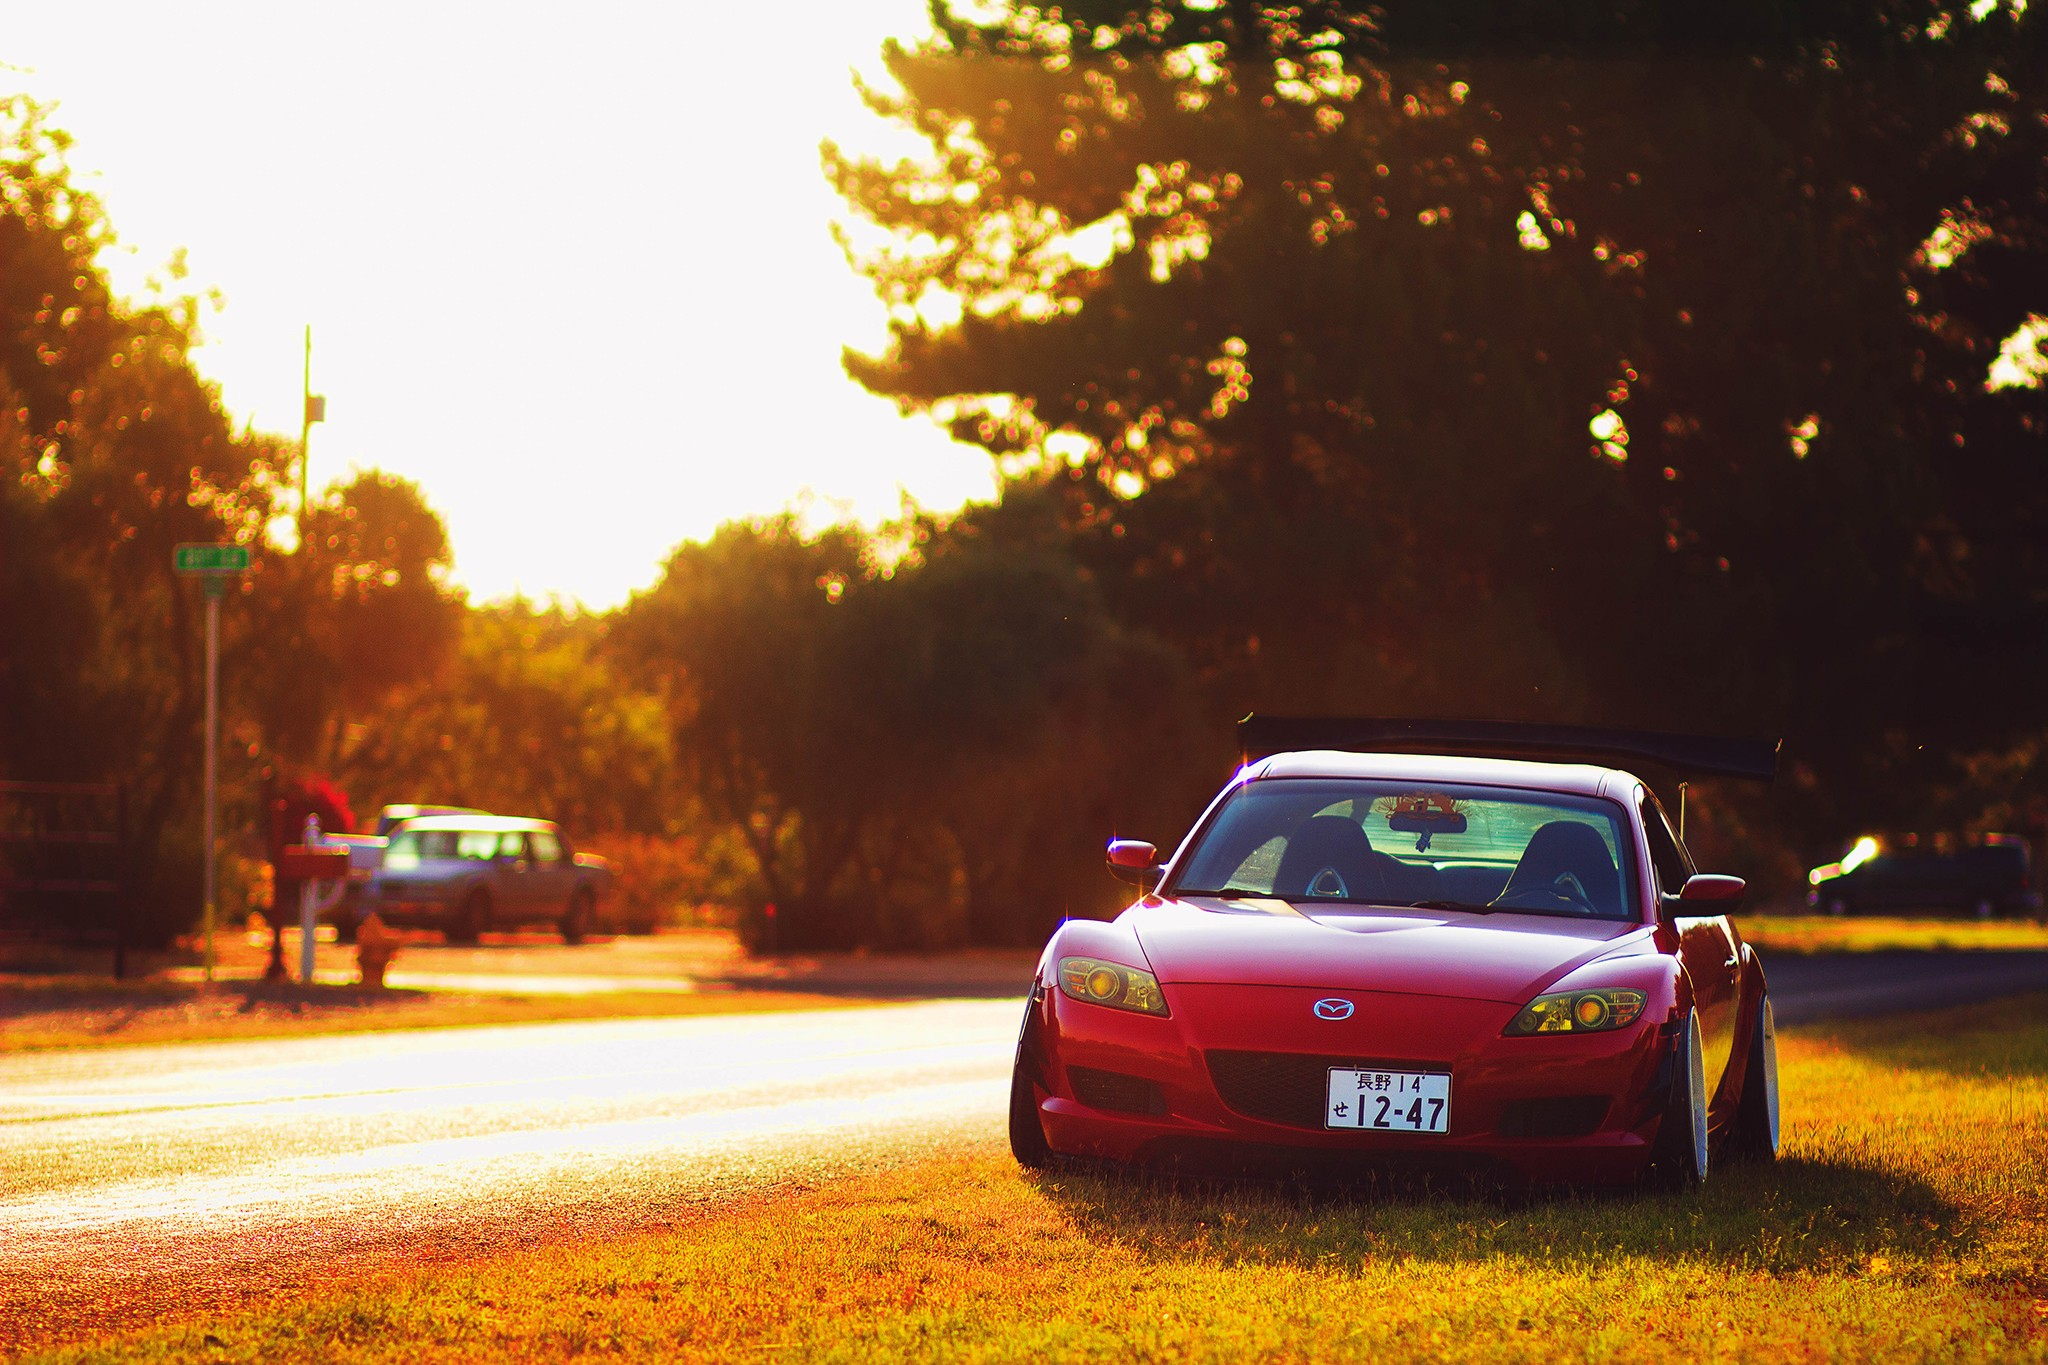 2048x1365 Wallpaper : px, drift, evening, lights, Mazda RX 8, morning, old car, Project CARS, red cars, sports car 4kWallpaper 747638 HD Wallpapers